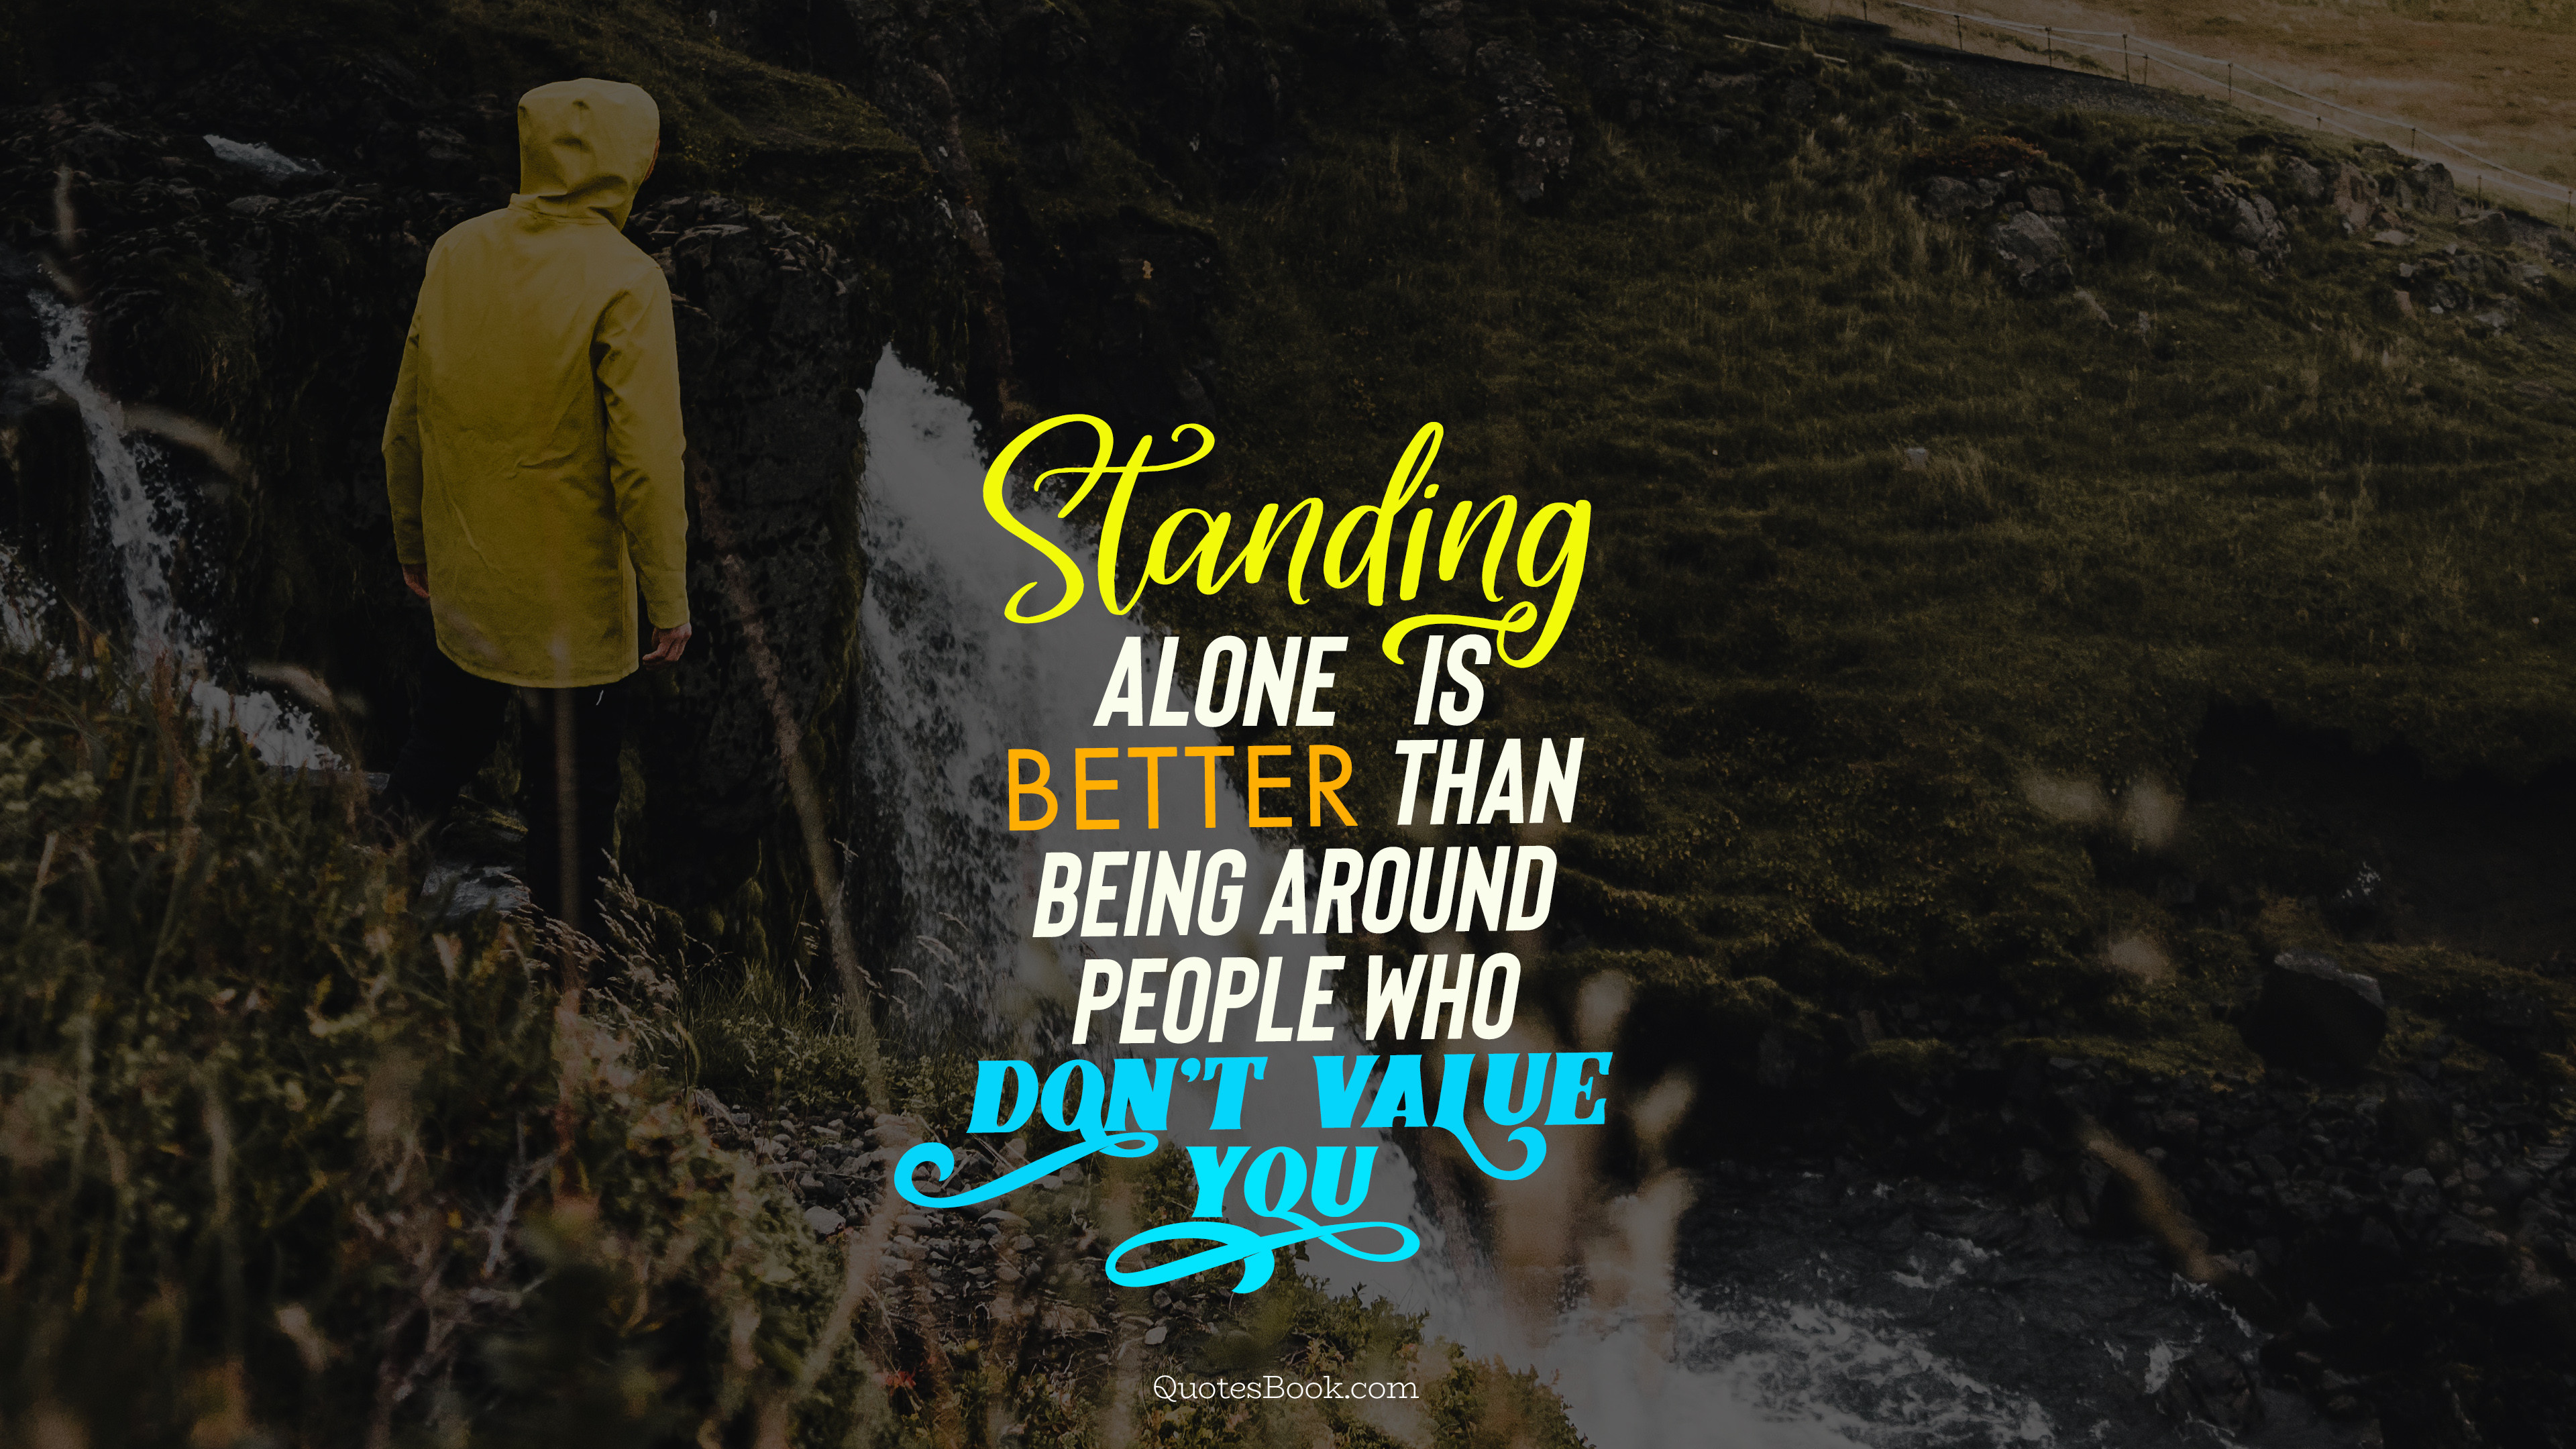 Standing alone is better than being around people who don't value you -  QuotesBook